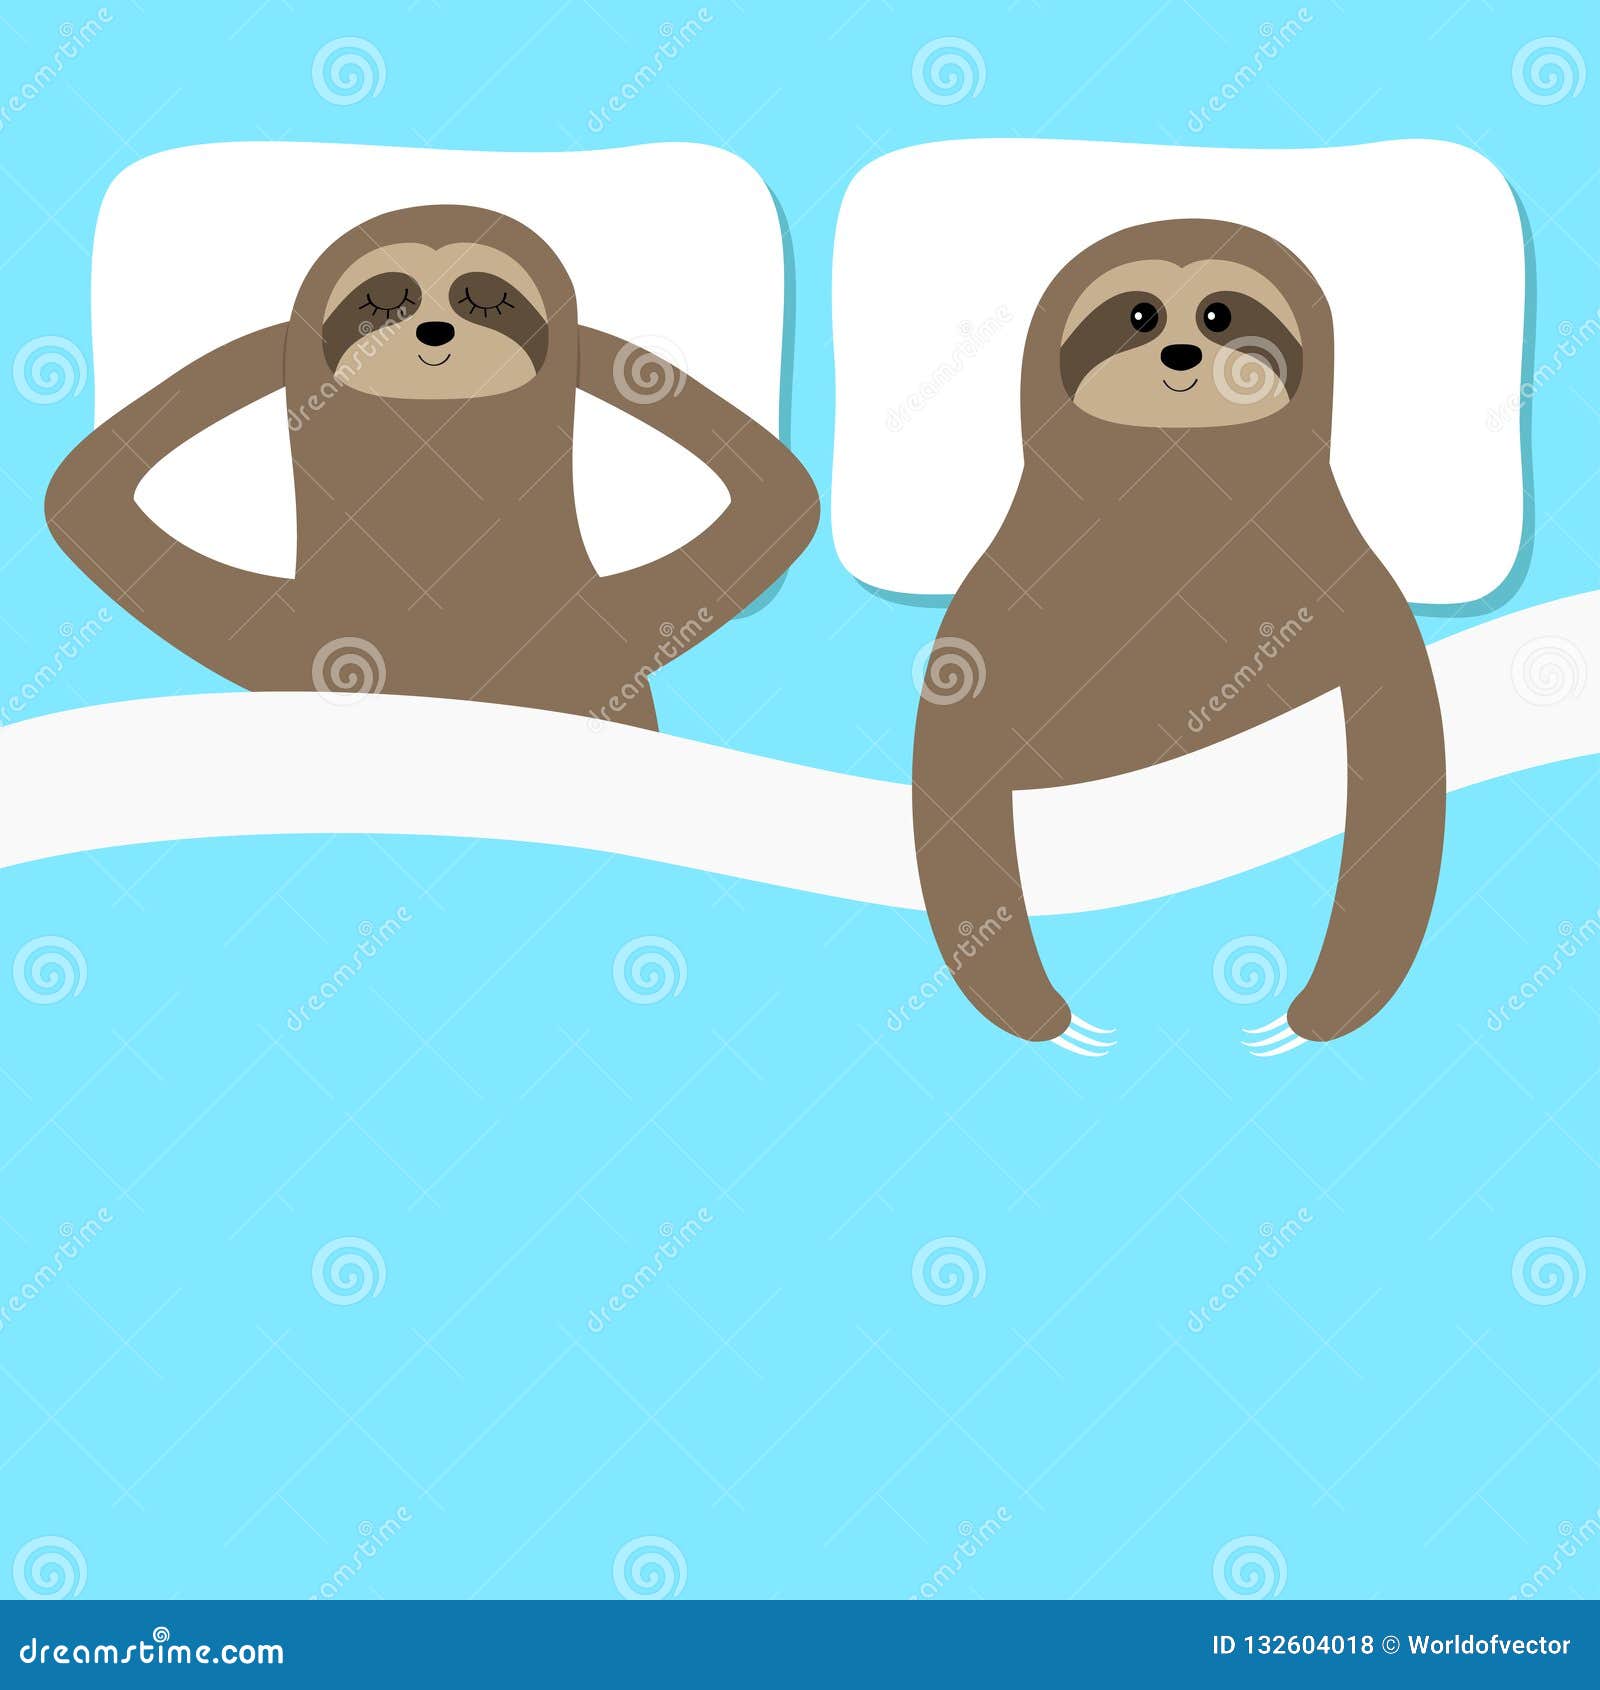 Sloth Family Love Couple Sleeping. Slow Down. Cant Sleep Going To Bed  Concept. Blanket Pillow Stock Vector - Illustration of room, kawaii:  132604018